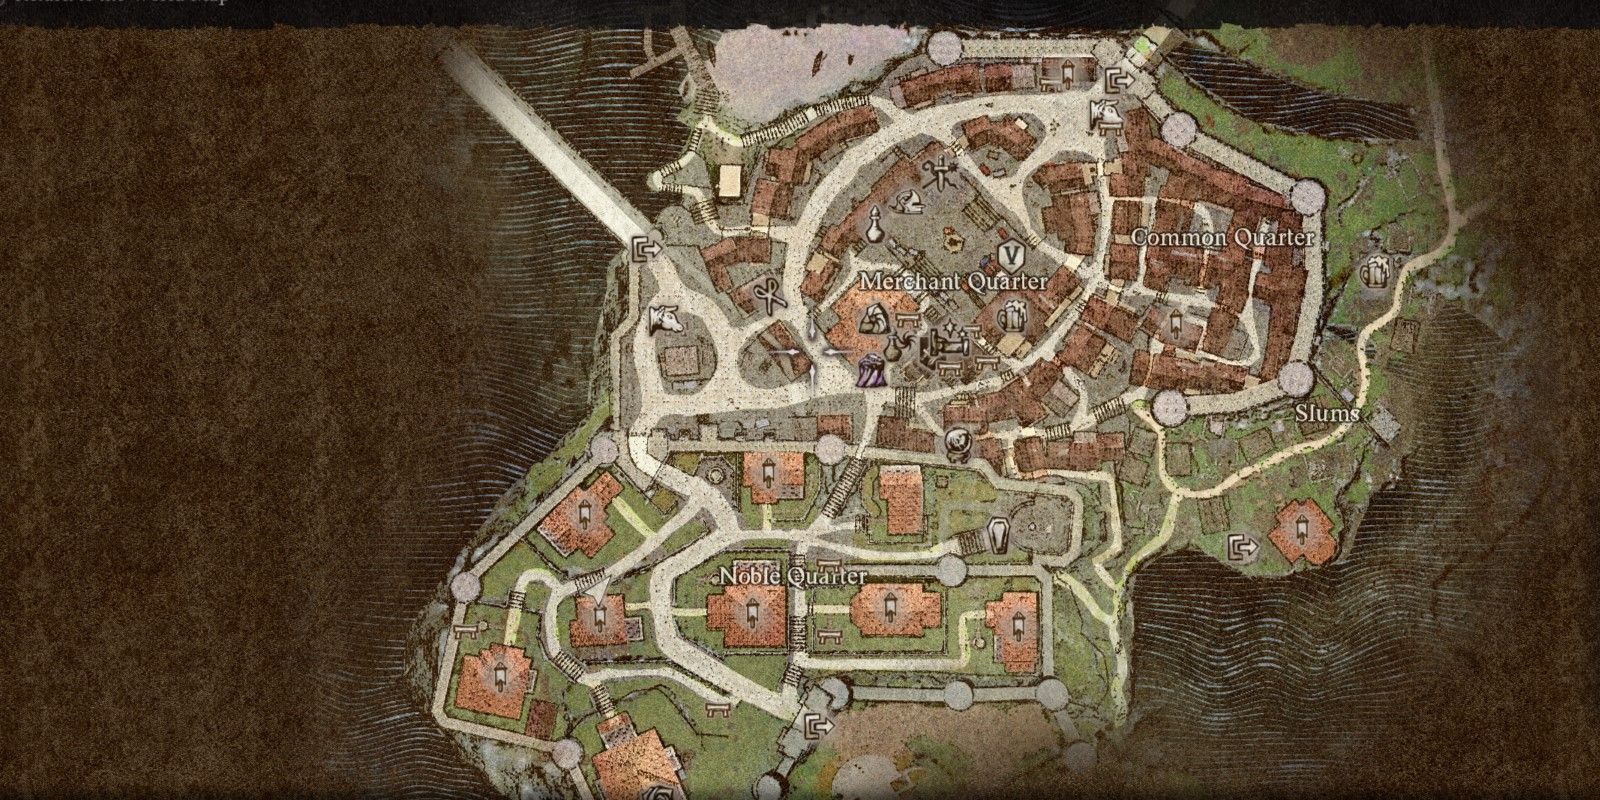 The Dragon's Dogma 2 character is showing the map for Vernworth.